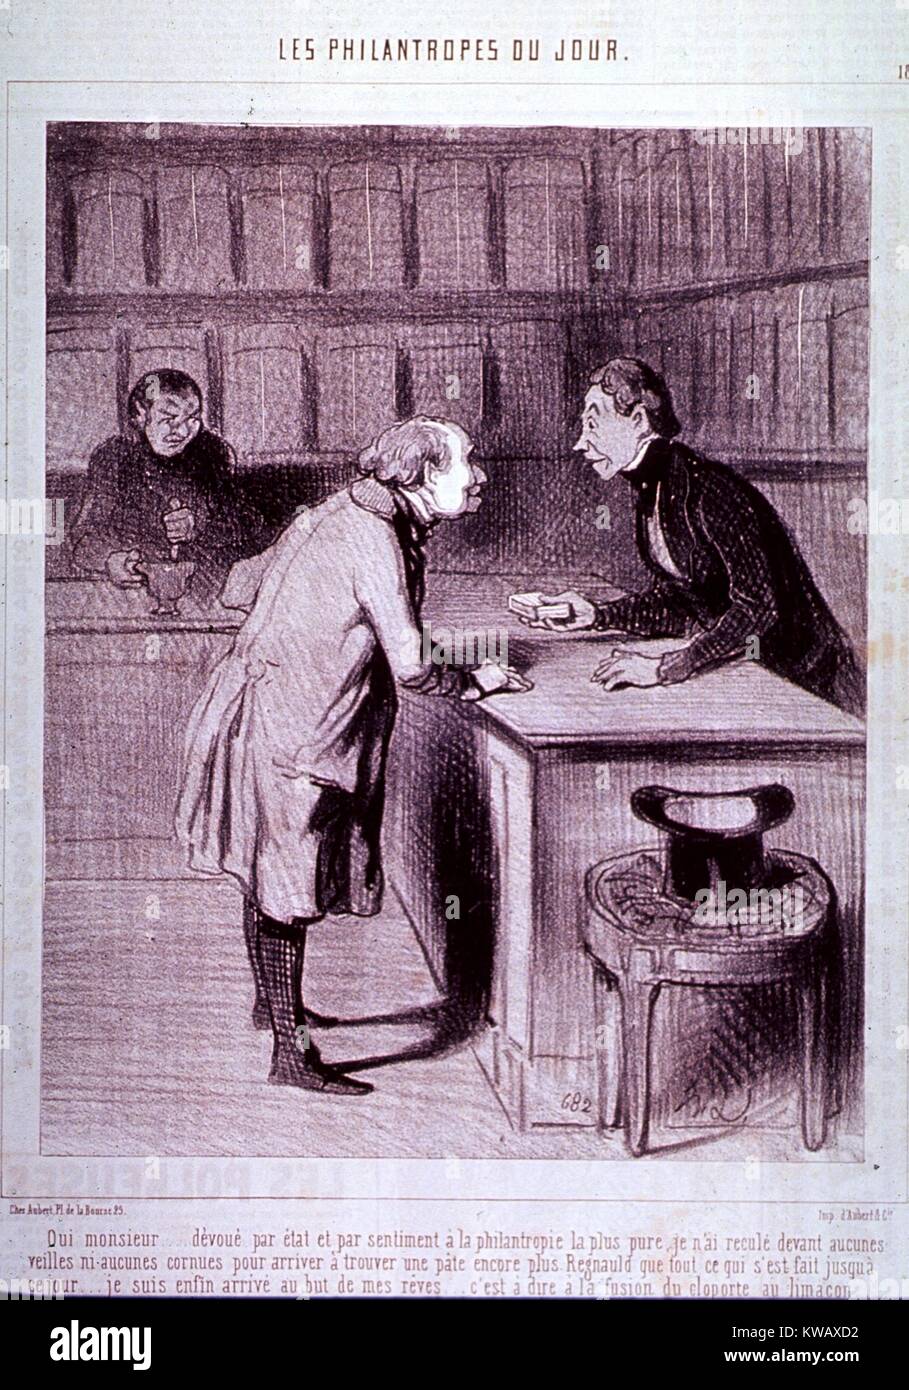 French lithograph by Honoreu Daumier of the interior of a pharmacy featuring a clerk with a customer, and an assistant grinding some medicinal substance with a mortar and pestle, France, 1844. Courtesy National Library of Medicine. Stock Photo